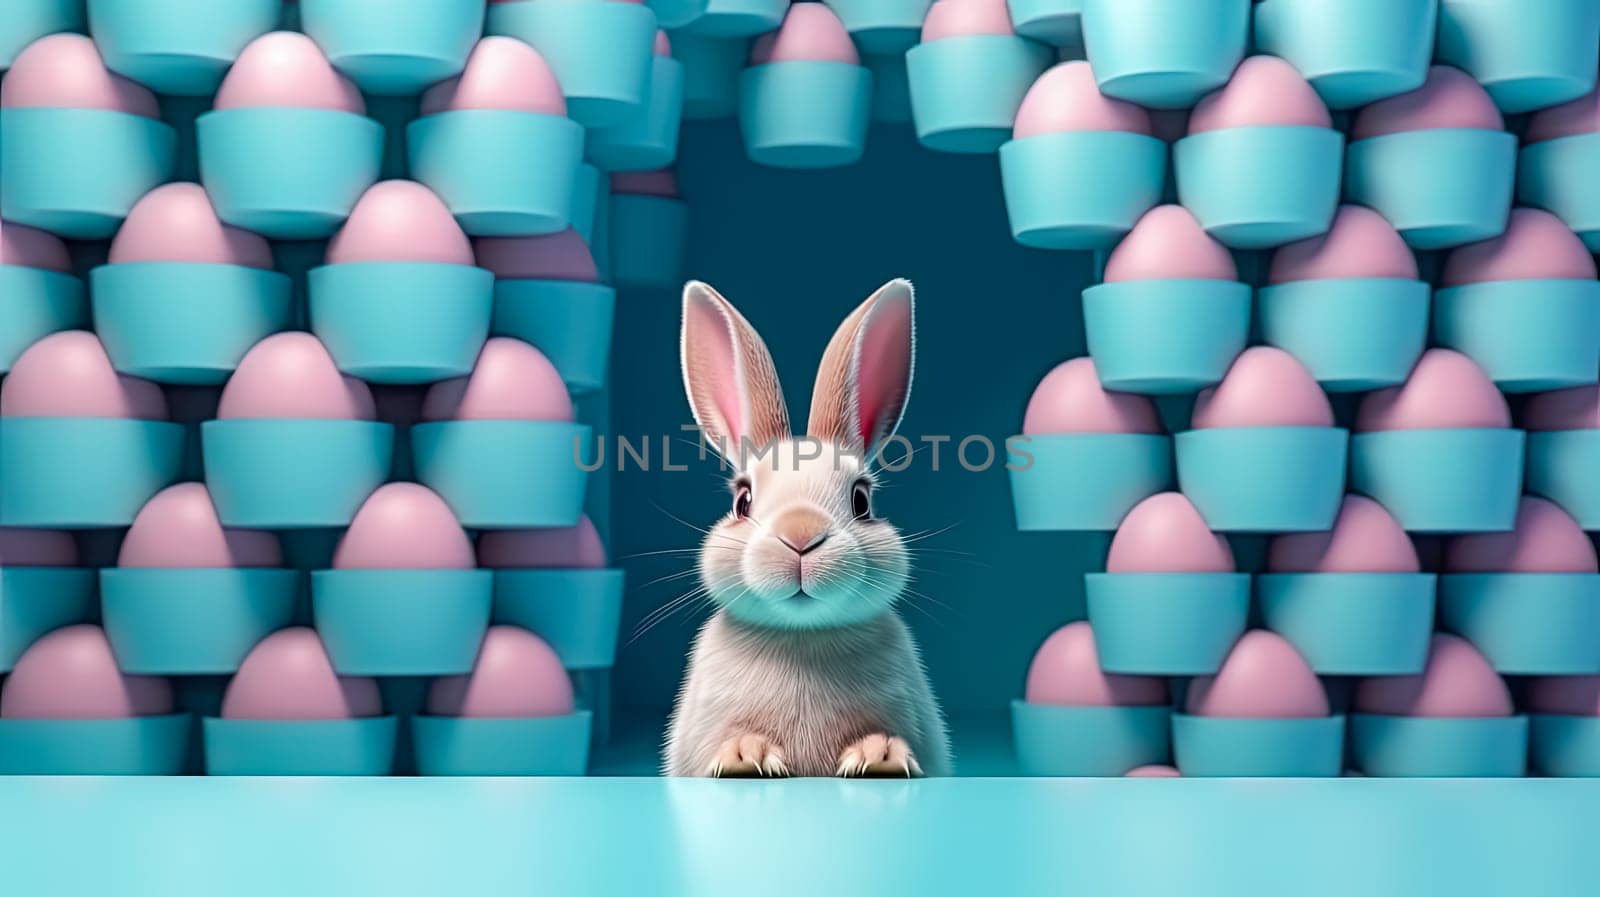 A playful Easter bunny colored paper background is a festive illustration that radiates the joy and exuberance of a colorful Easter celebration